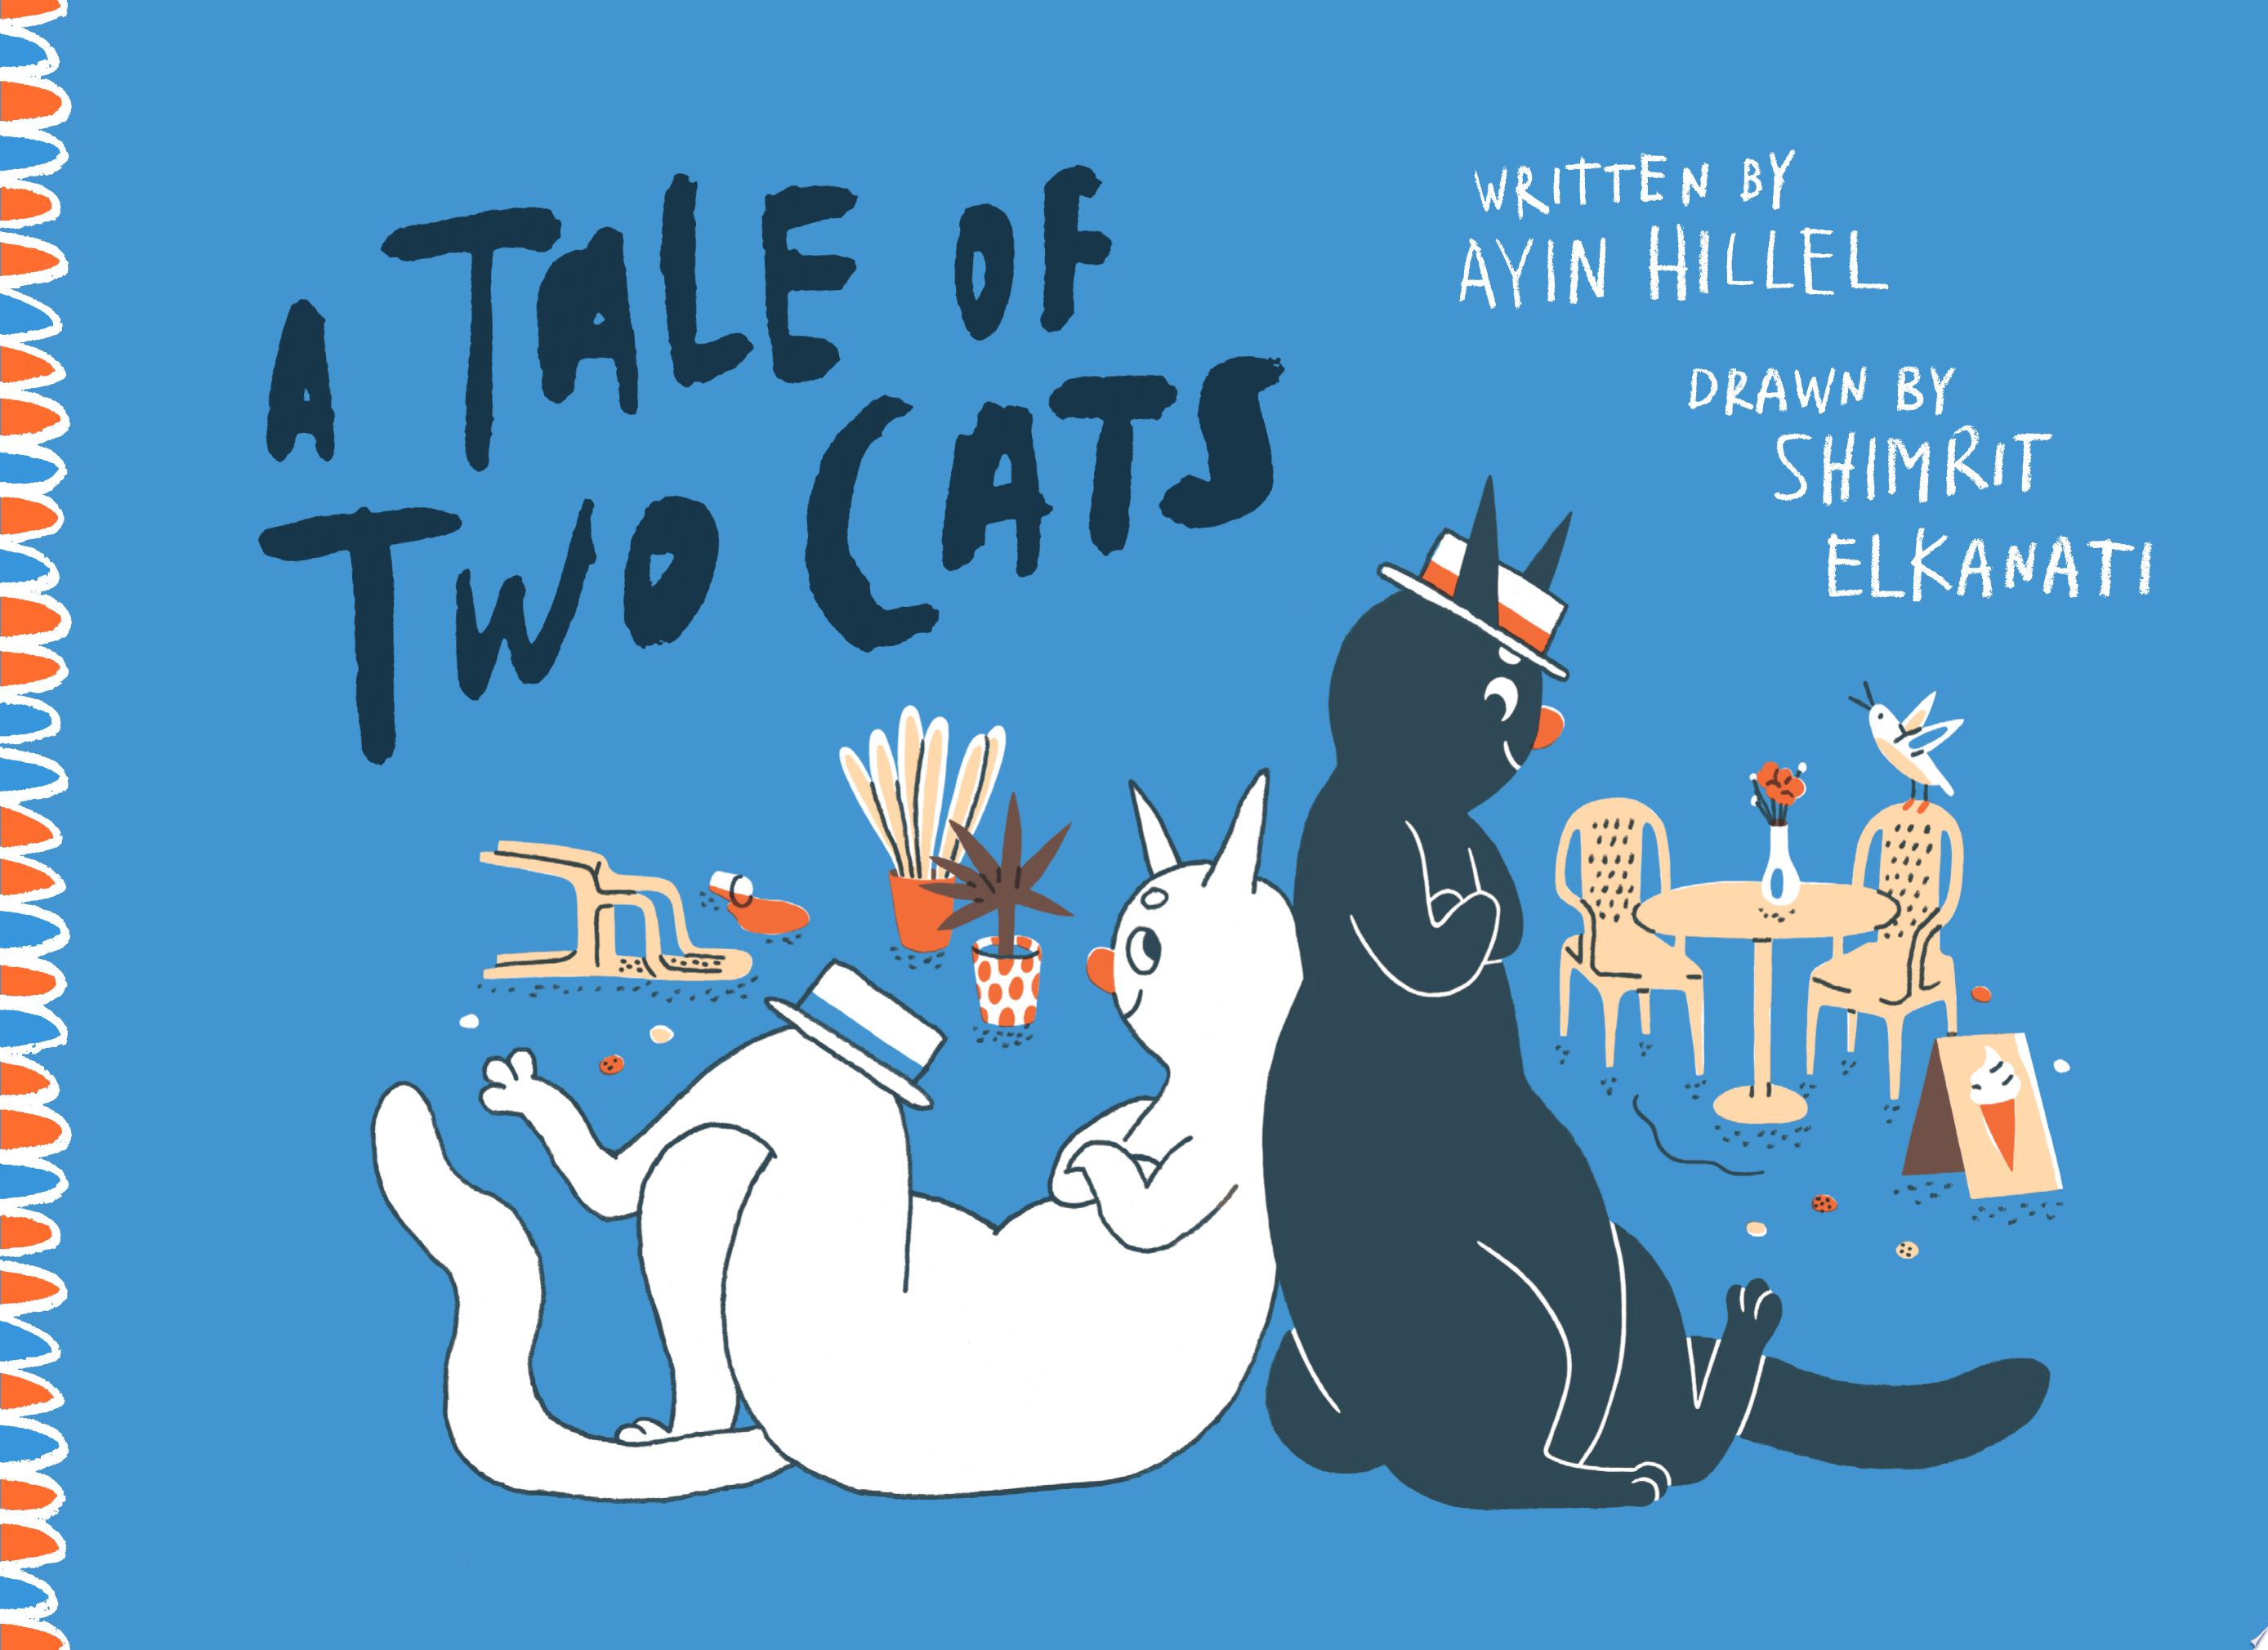 Image for "A Tale of Two Cats"